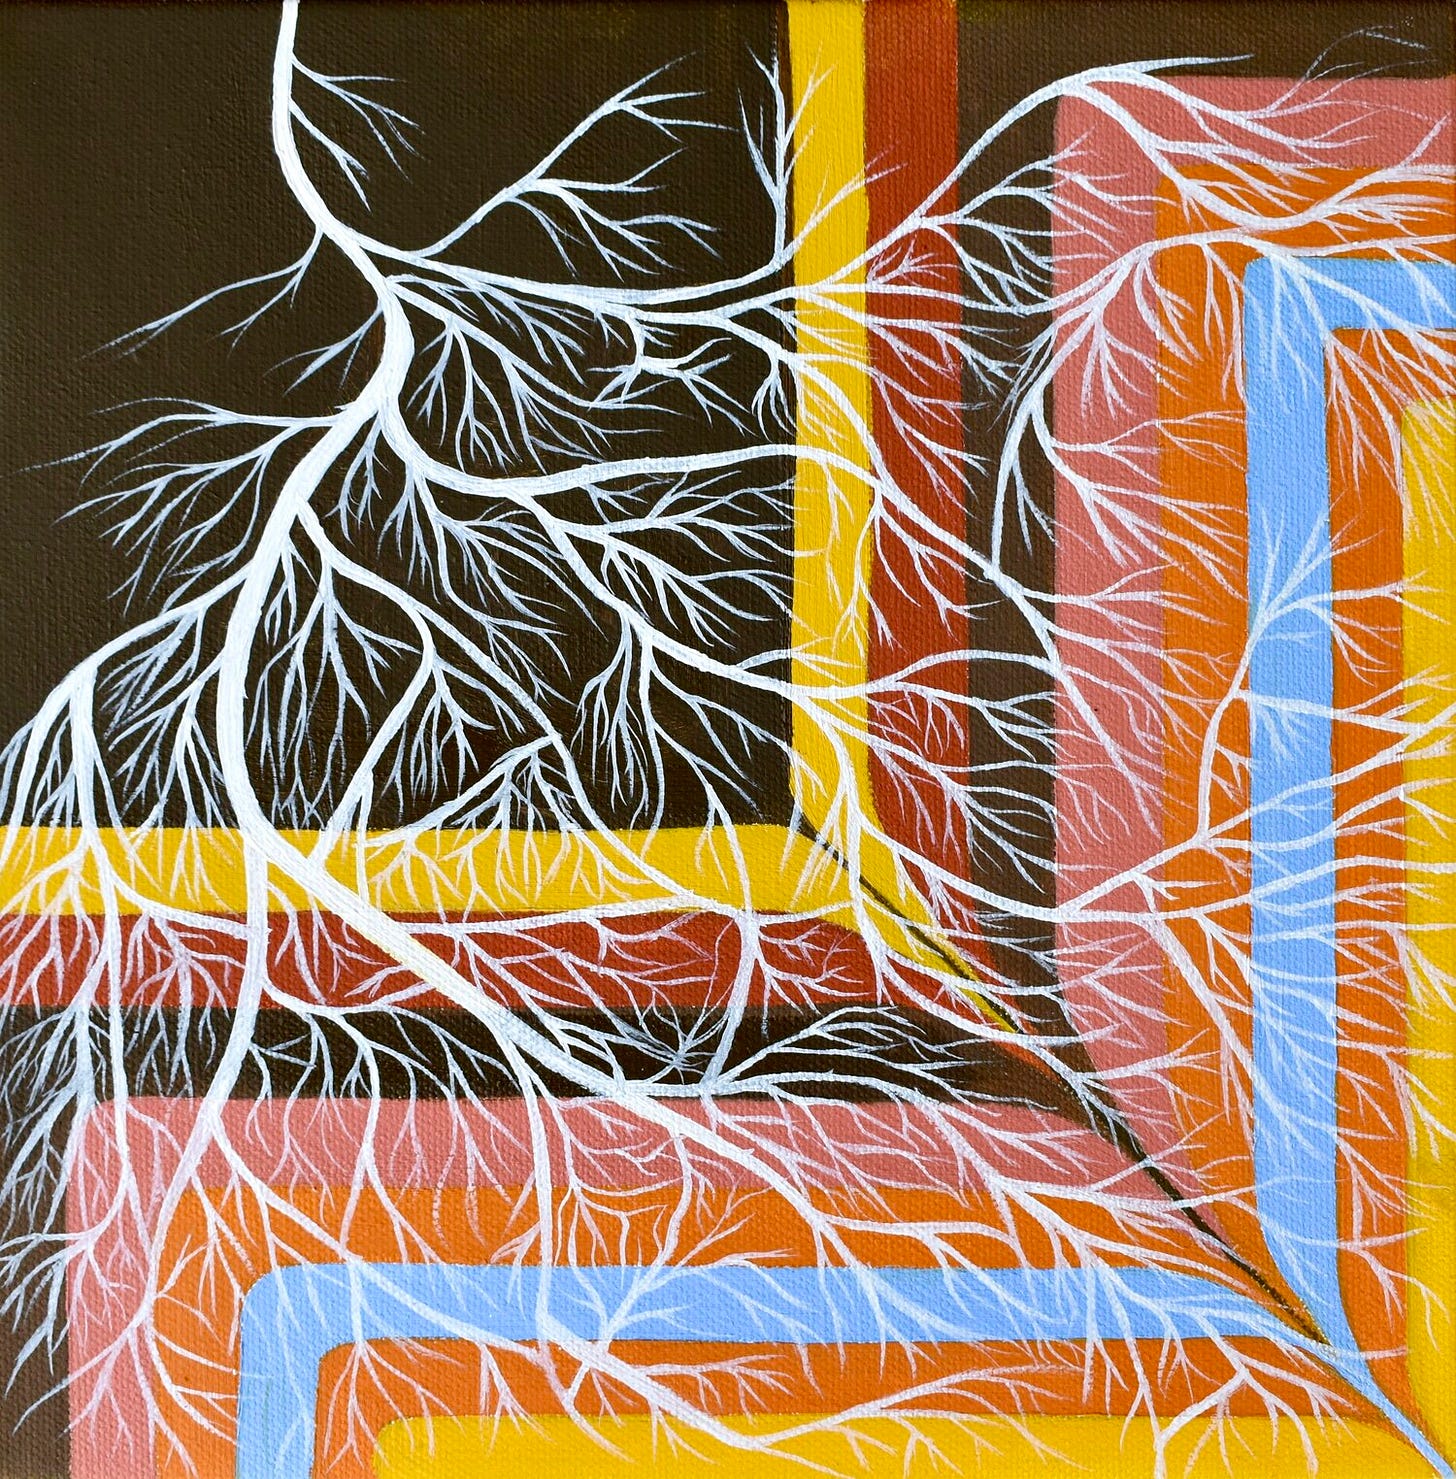 Mycorrhizal  Robyn Dyer Oil Paint on Canvas   Artist Statement  Mycorrhizal networks are fungal systems in plants and trees that connect one plant to another, often many. Through these networks, signals and nutrients are exchanged, with both parties benefitting from the connection and interaction. These exchanges help the oldest trees nurture and care for young seedlings or can be used to signal a defense against oncoming threats like drought and infestation. Without these systems, many ecosystems could not thrive. Inspiration strikes me when human nature and mother nature sing the same song and follow the same patterns. We, too, can benefit from the exchanges of our networks.   Artist Bio  Robyn Dyer is an artist and art educator based in Bakersfield, California. She received her Bachelors of Arts degree in Art Education from California State University Bakersfield under the mentorship of Joey Kötting. Dyer creates paintings inspired by the oddities and nuances of nature and the colors and spirit of California.